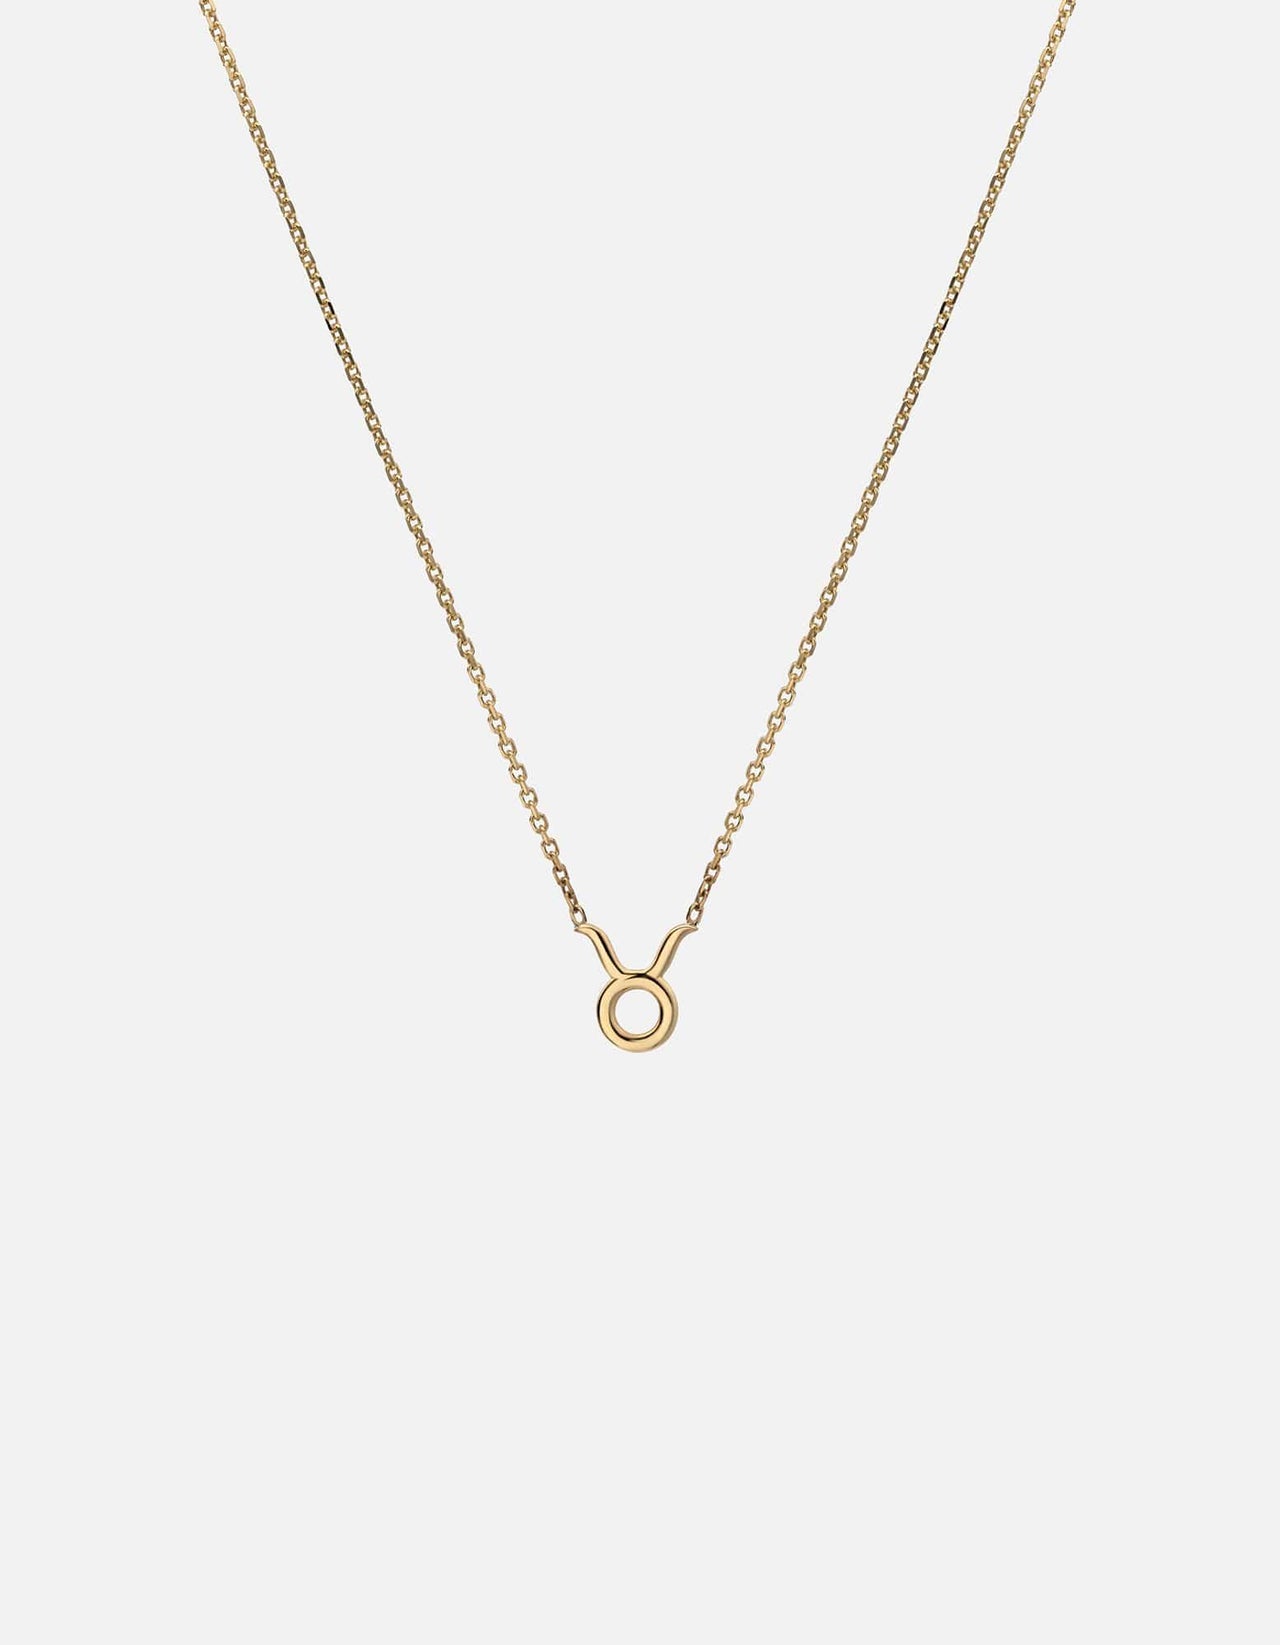 Taurus constellation necklace in gold - Delftia science jewelry